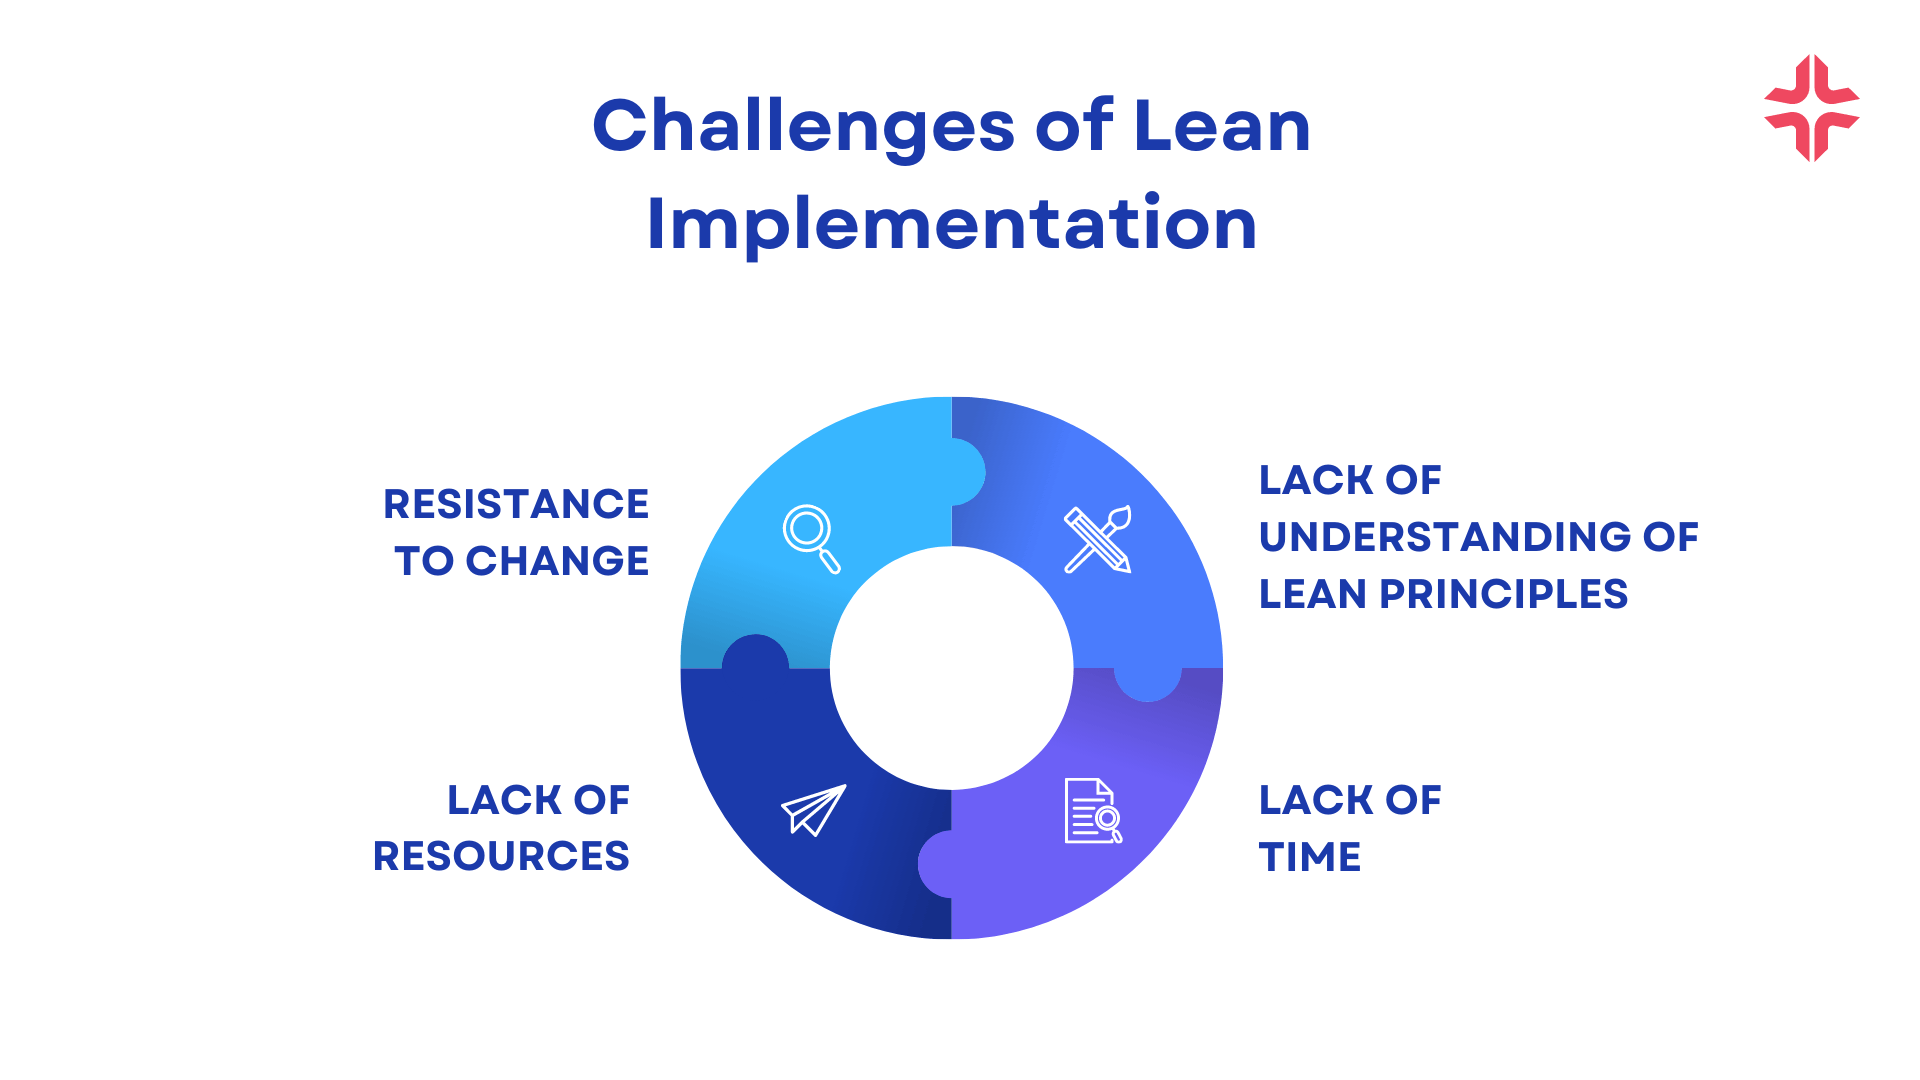 Challenges of Lean Implementation